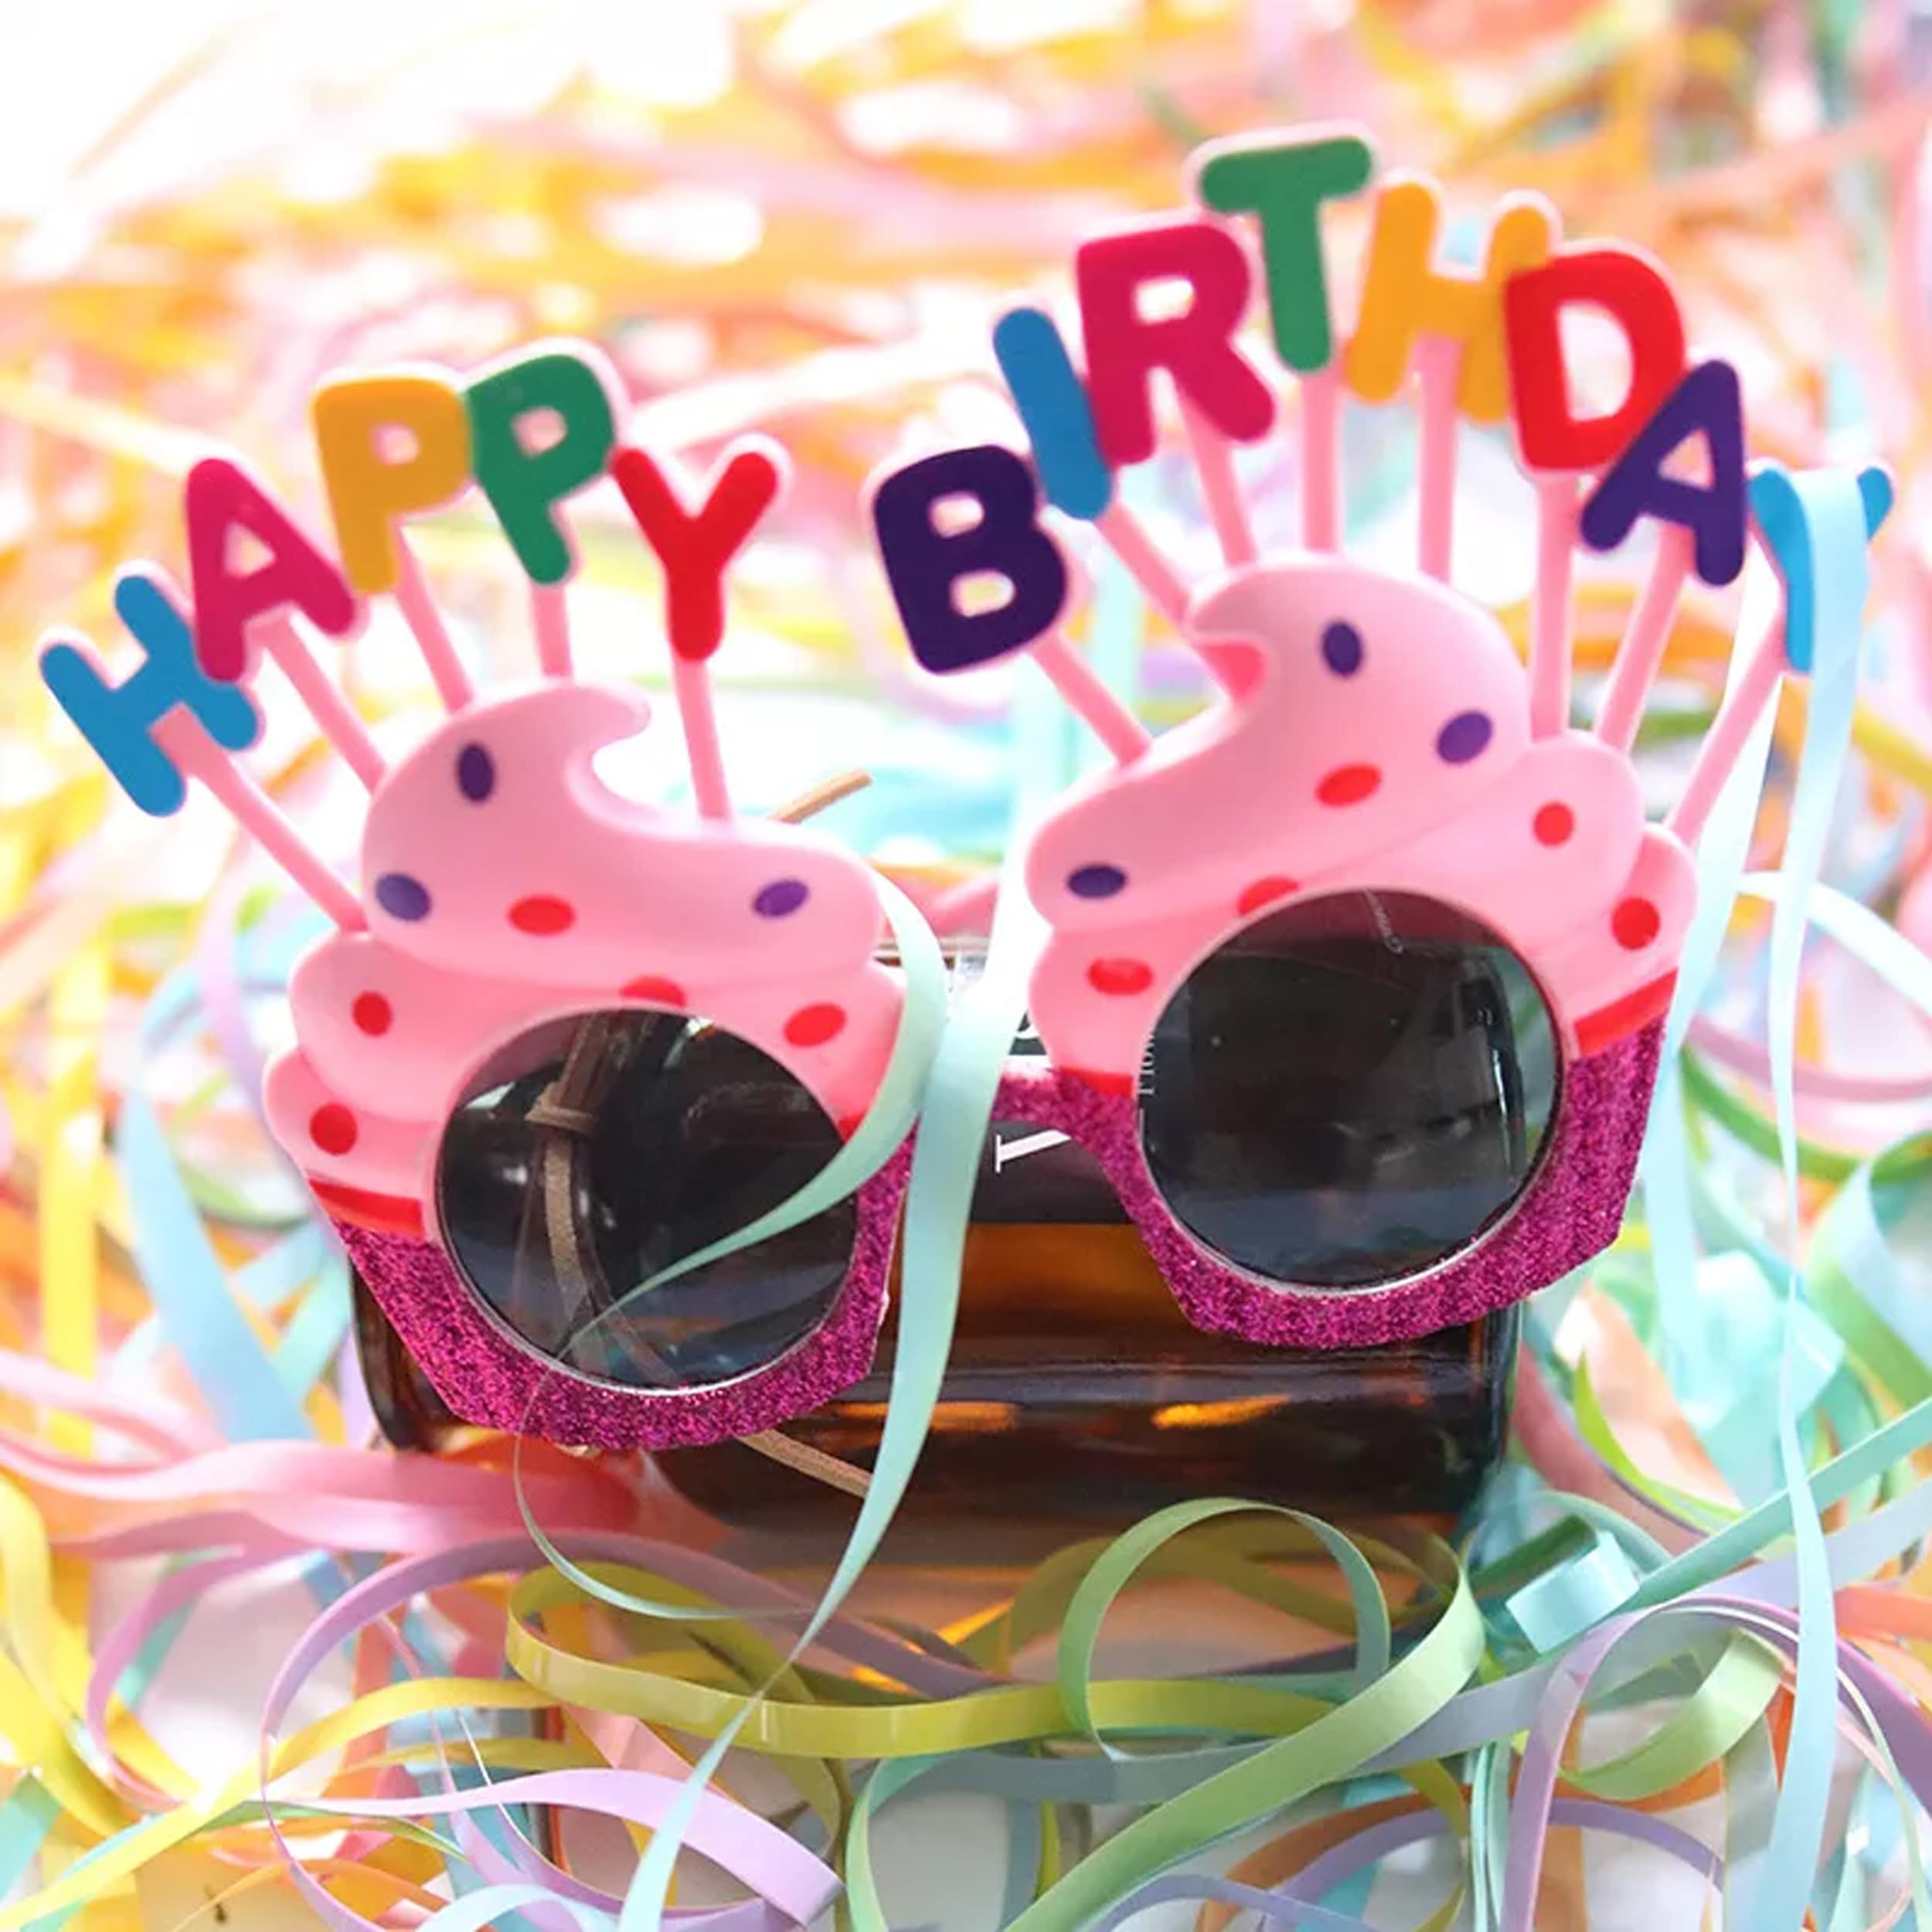 Shop Wholesale Funky Glasses - Add Fun and Quirky Flair to Birthday Parties and Events